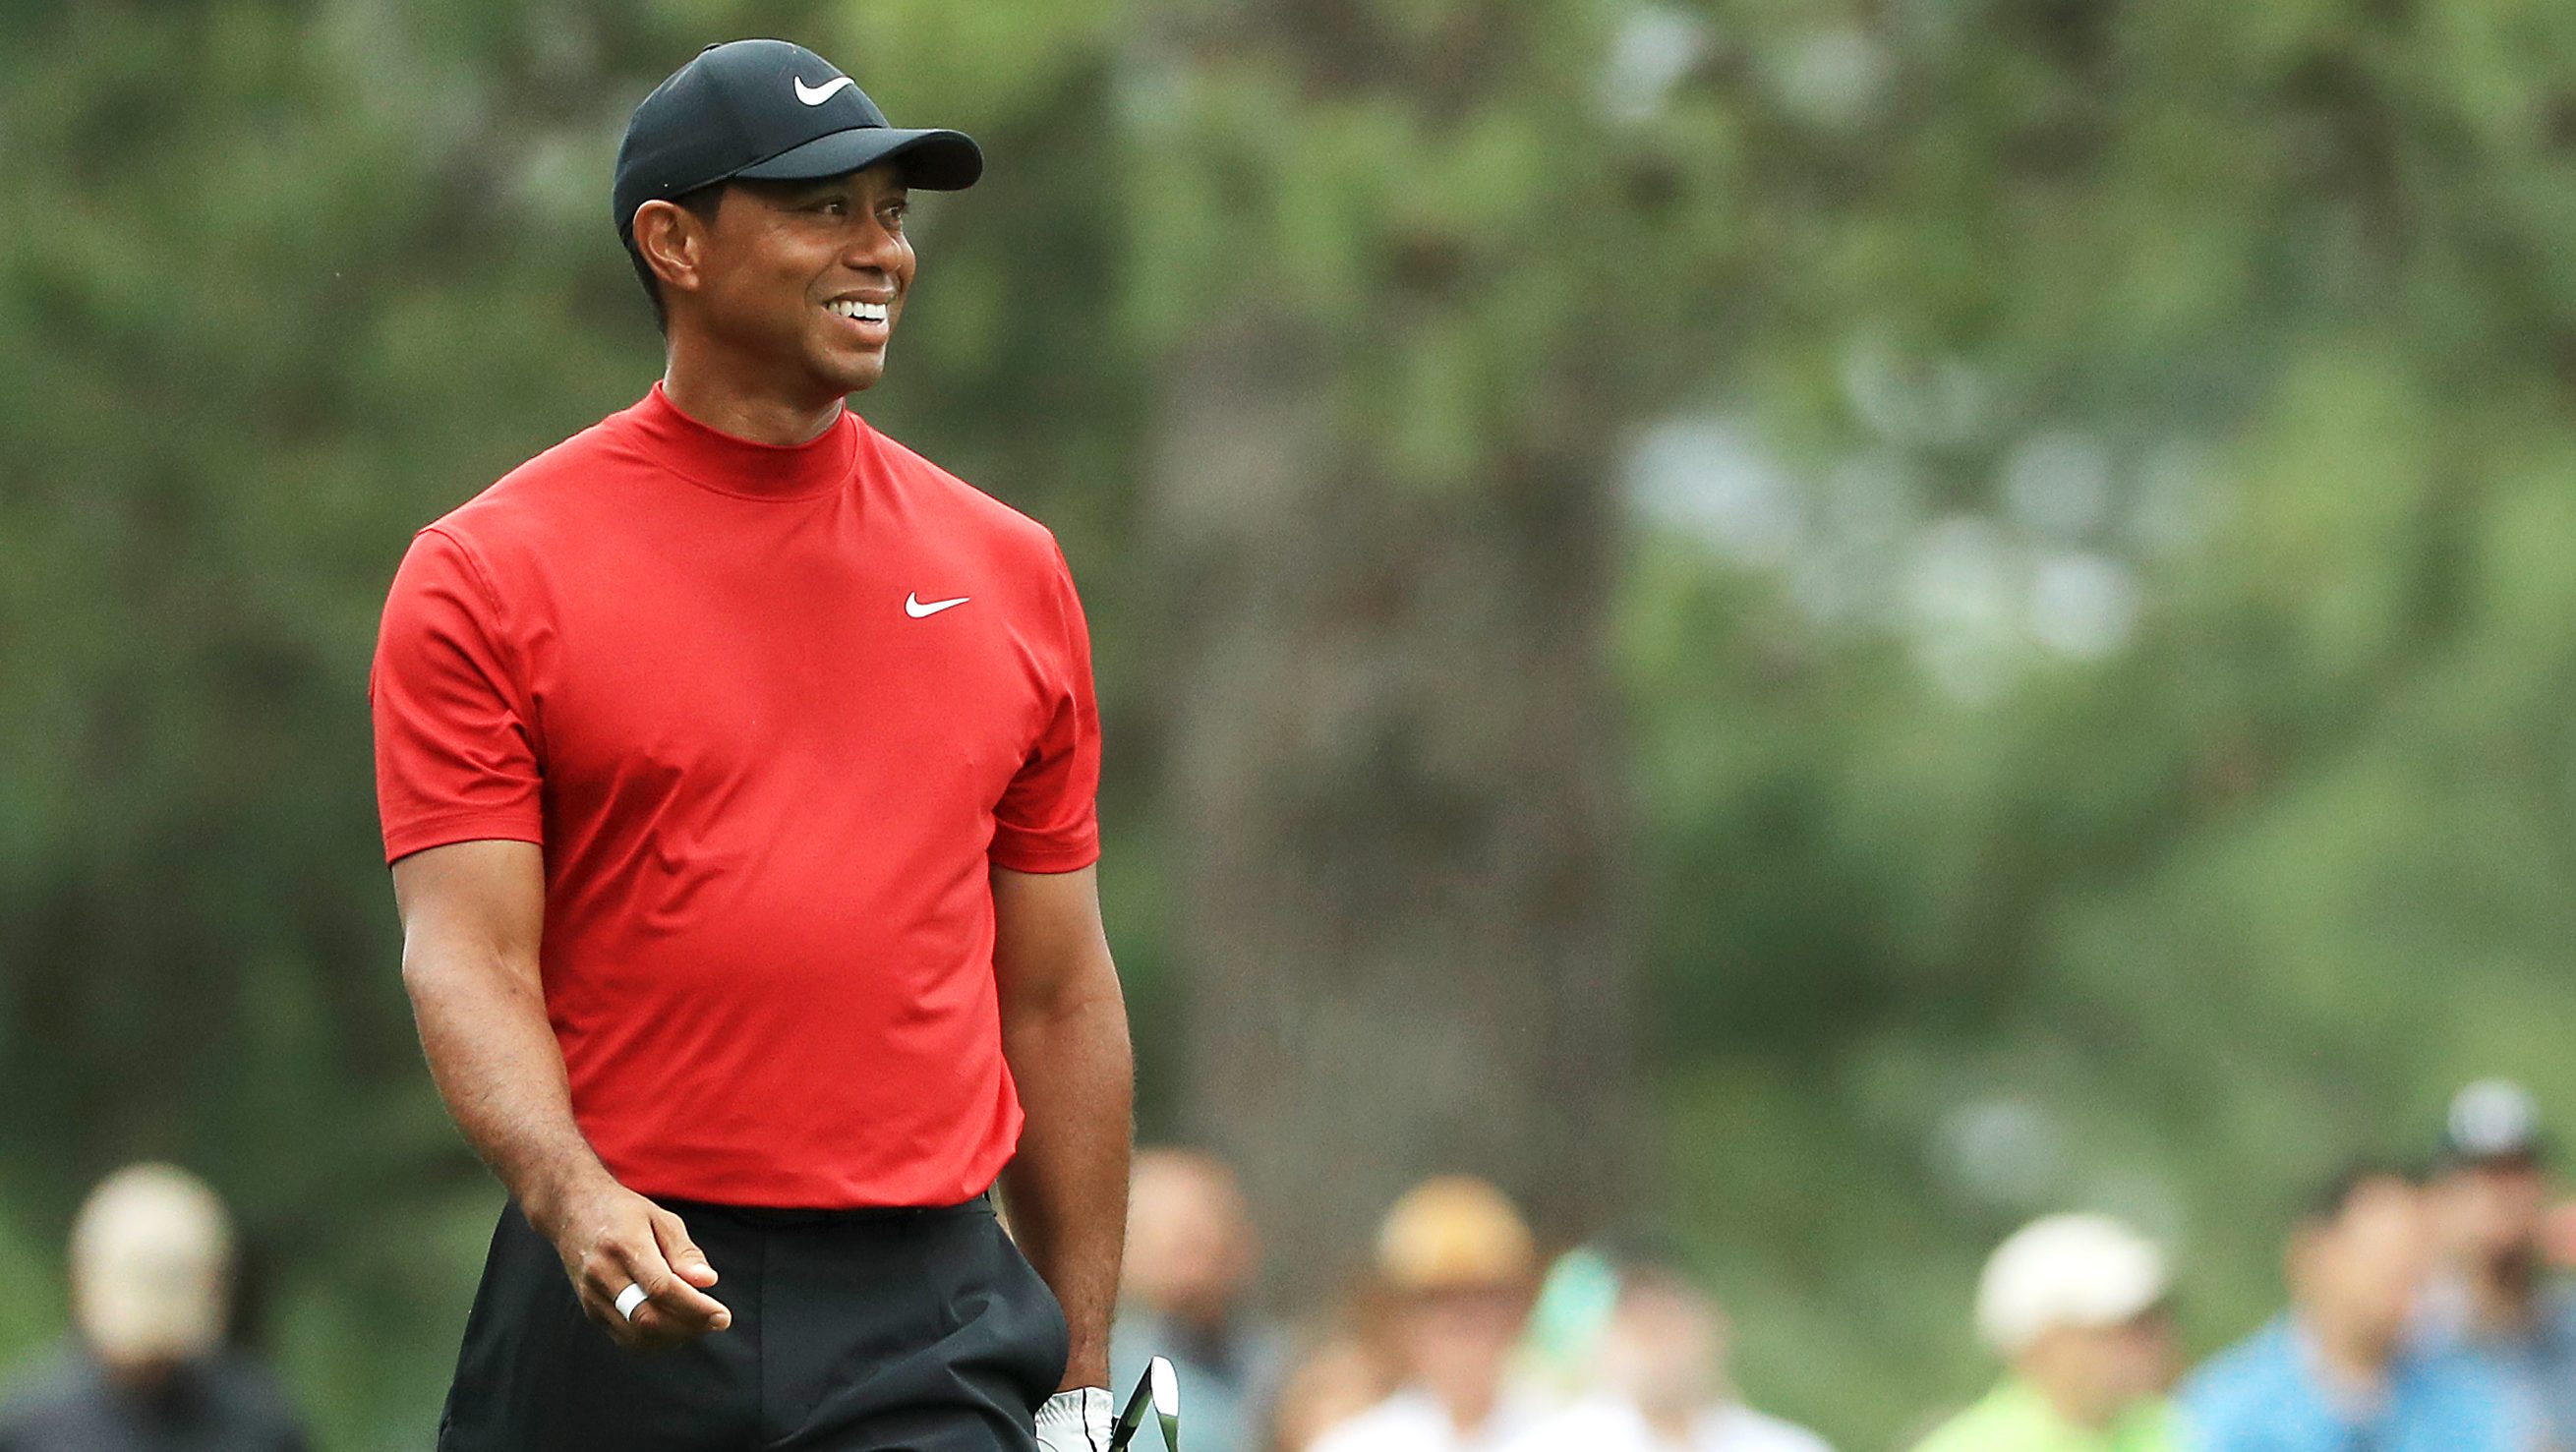 Tiger Woods & Masters: When Did He Last Win a Major?